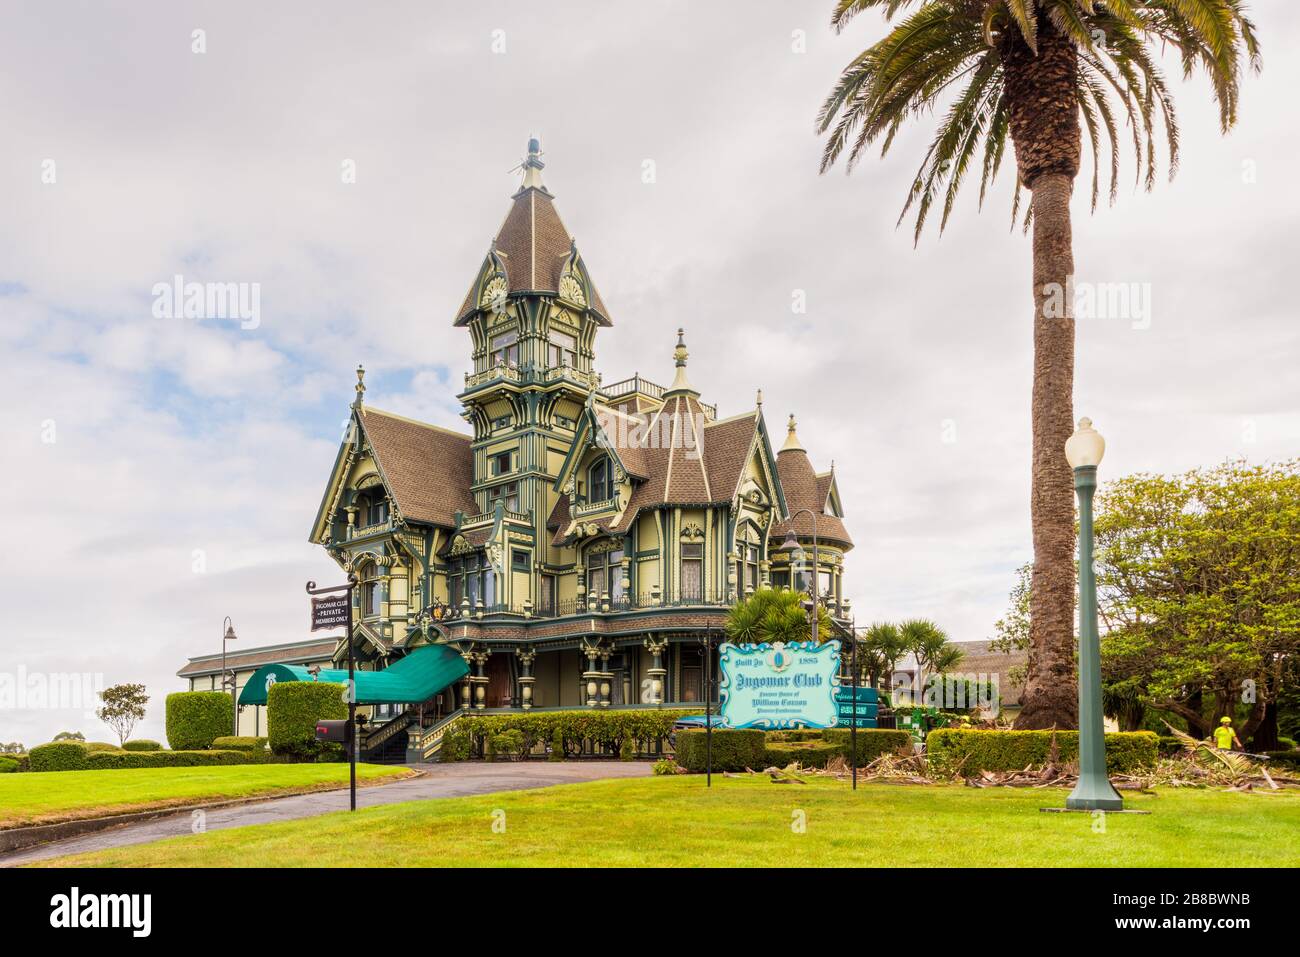 Carson Mansion in Eureka, California, USA, a Victorian style house which was built in 1885. It has been a private club since 1950. Stock Photo